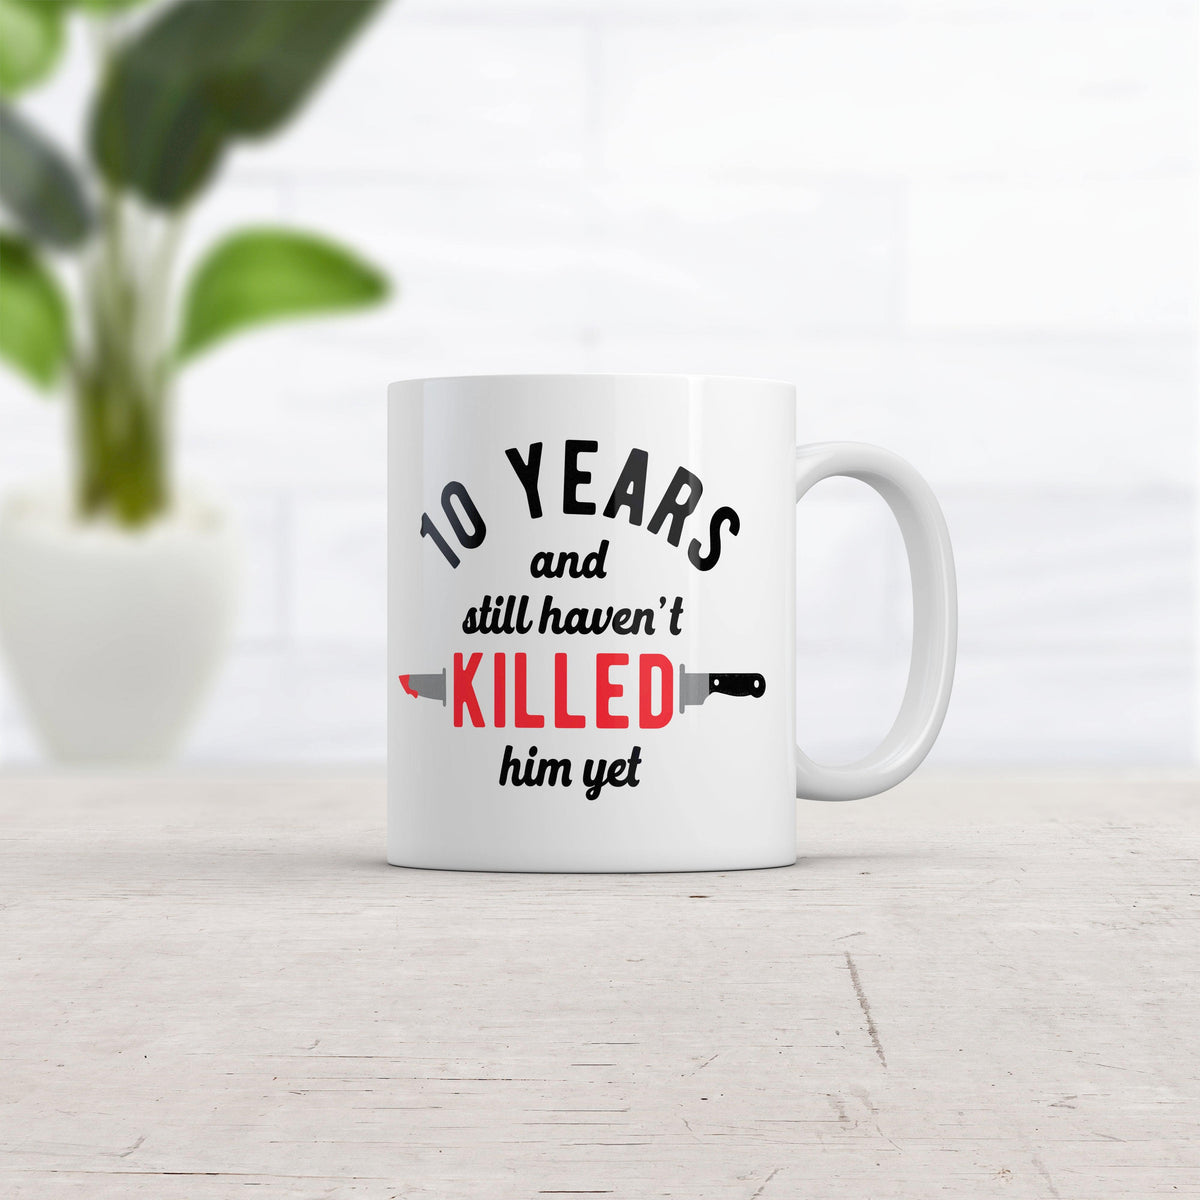 10 Years And I Still Havent Killed Him Yet Mug Funny Sarcastic Married Anniversary Novelty Coffee Cup-11oz  -  Crazy Dog T-Shirts